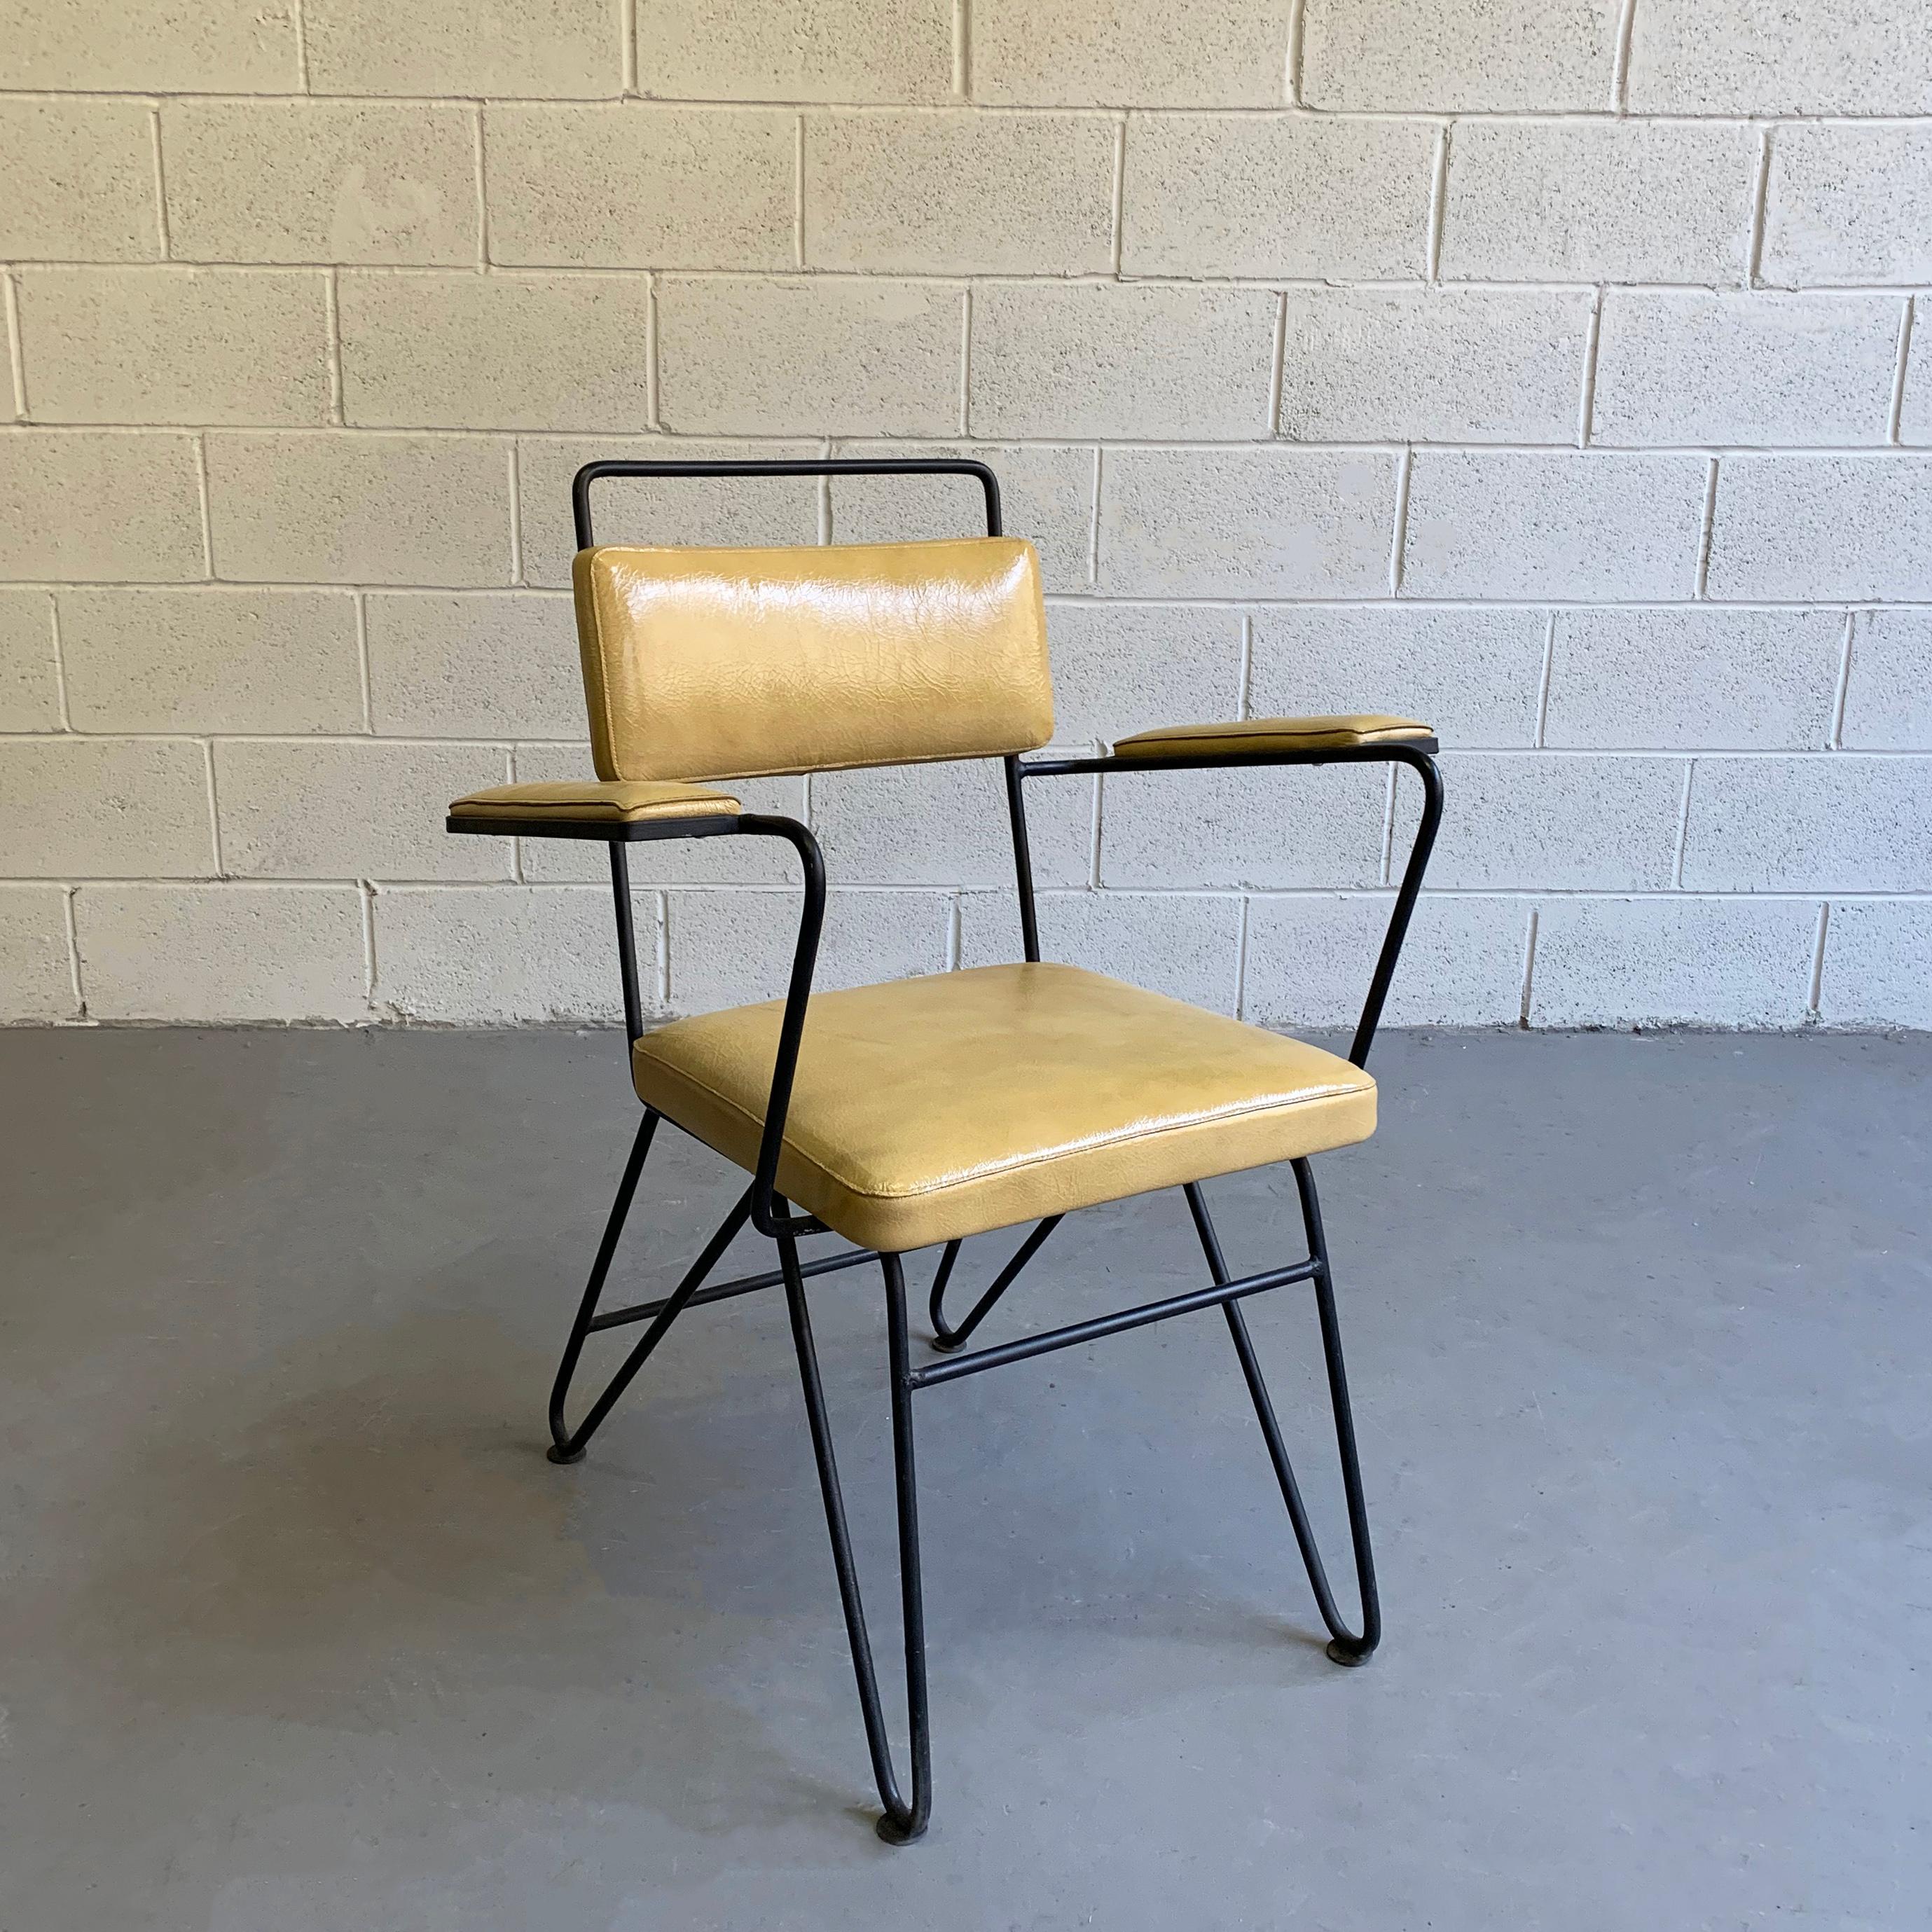 Outstanding, Mid-Century Modern armchair attributed to Dan Johnson for Pacific Iron features a highly-stylized, wrought iron frame with mustard, crinkled, patent leather upholstery. A unique, single stitch upholstery technique accentuates the